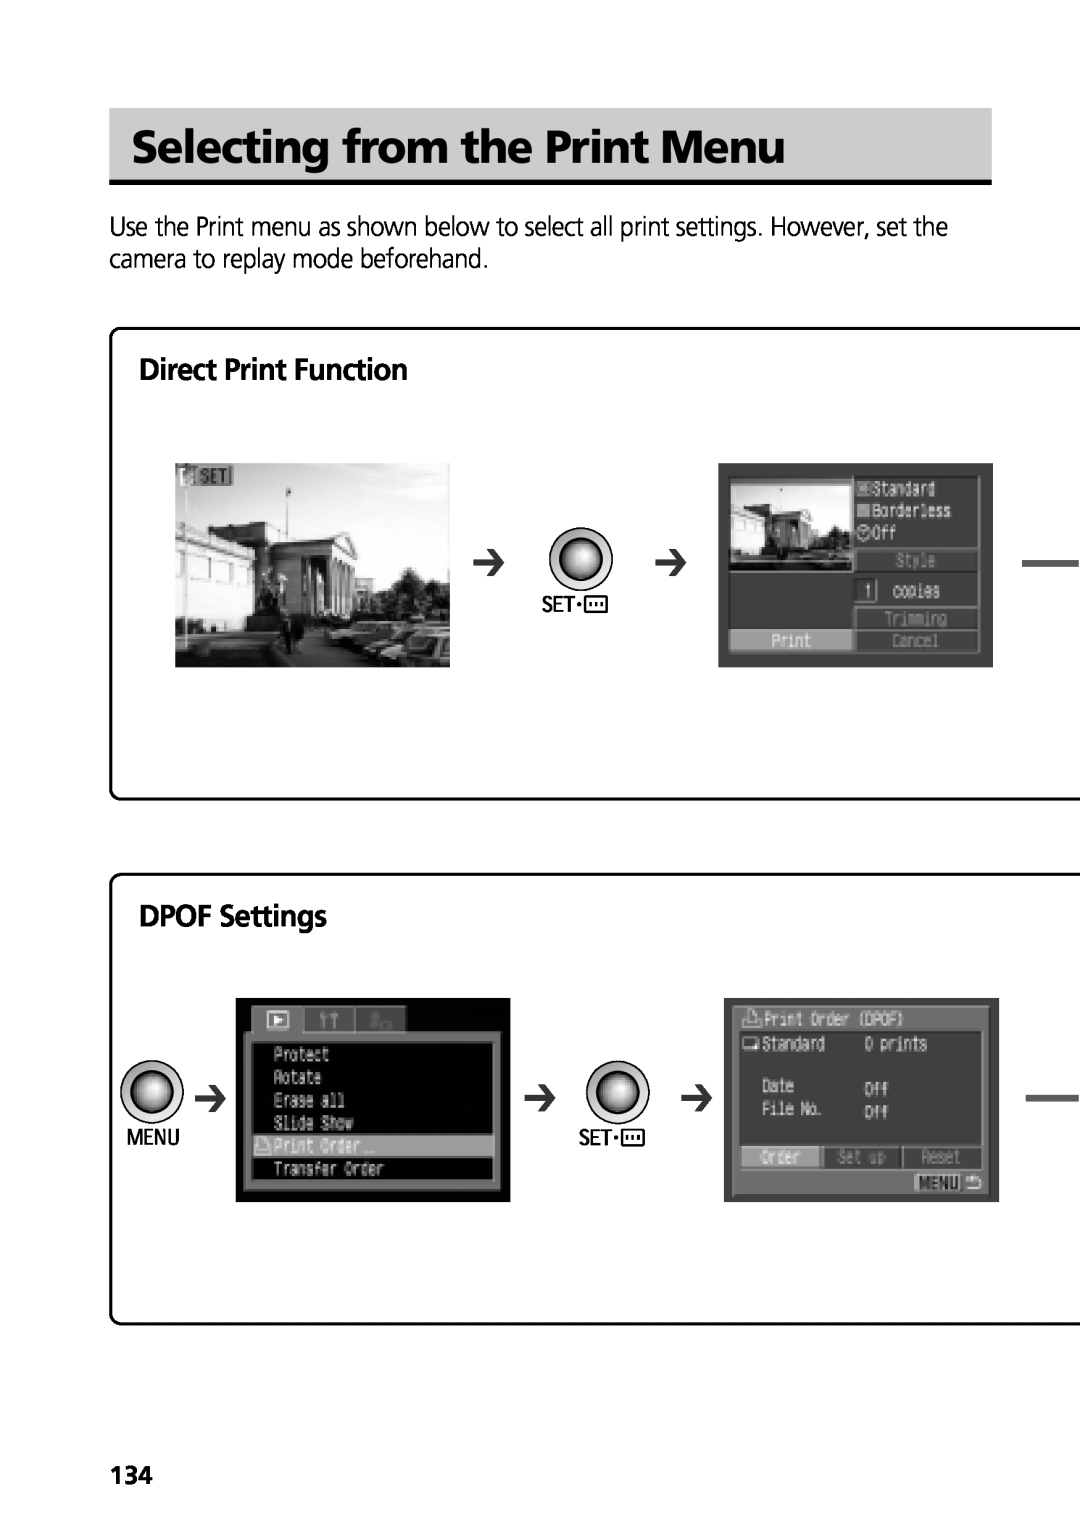 Canon G3 manual Selecting from the Print Menu, Direct Print Function, DPOF Settings 